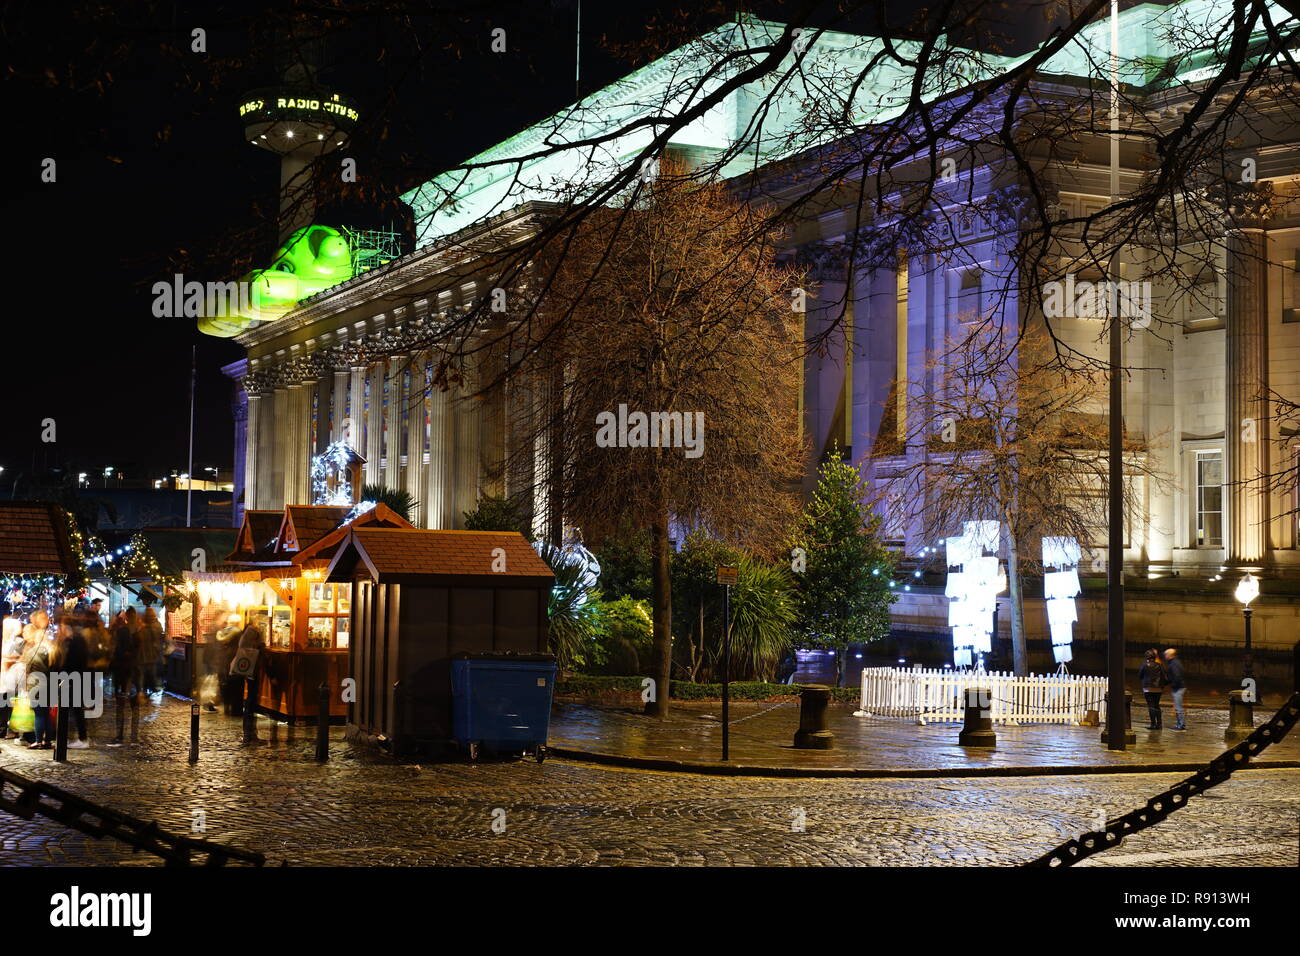 St George’s Hall, Lime Street, Liverpool, St John’s Beacon in background, Steble Fountain in the foreground. Image taken in December 2016. Stock Photo